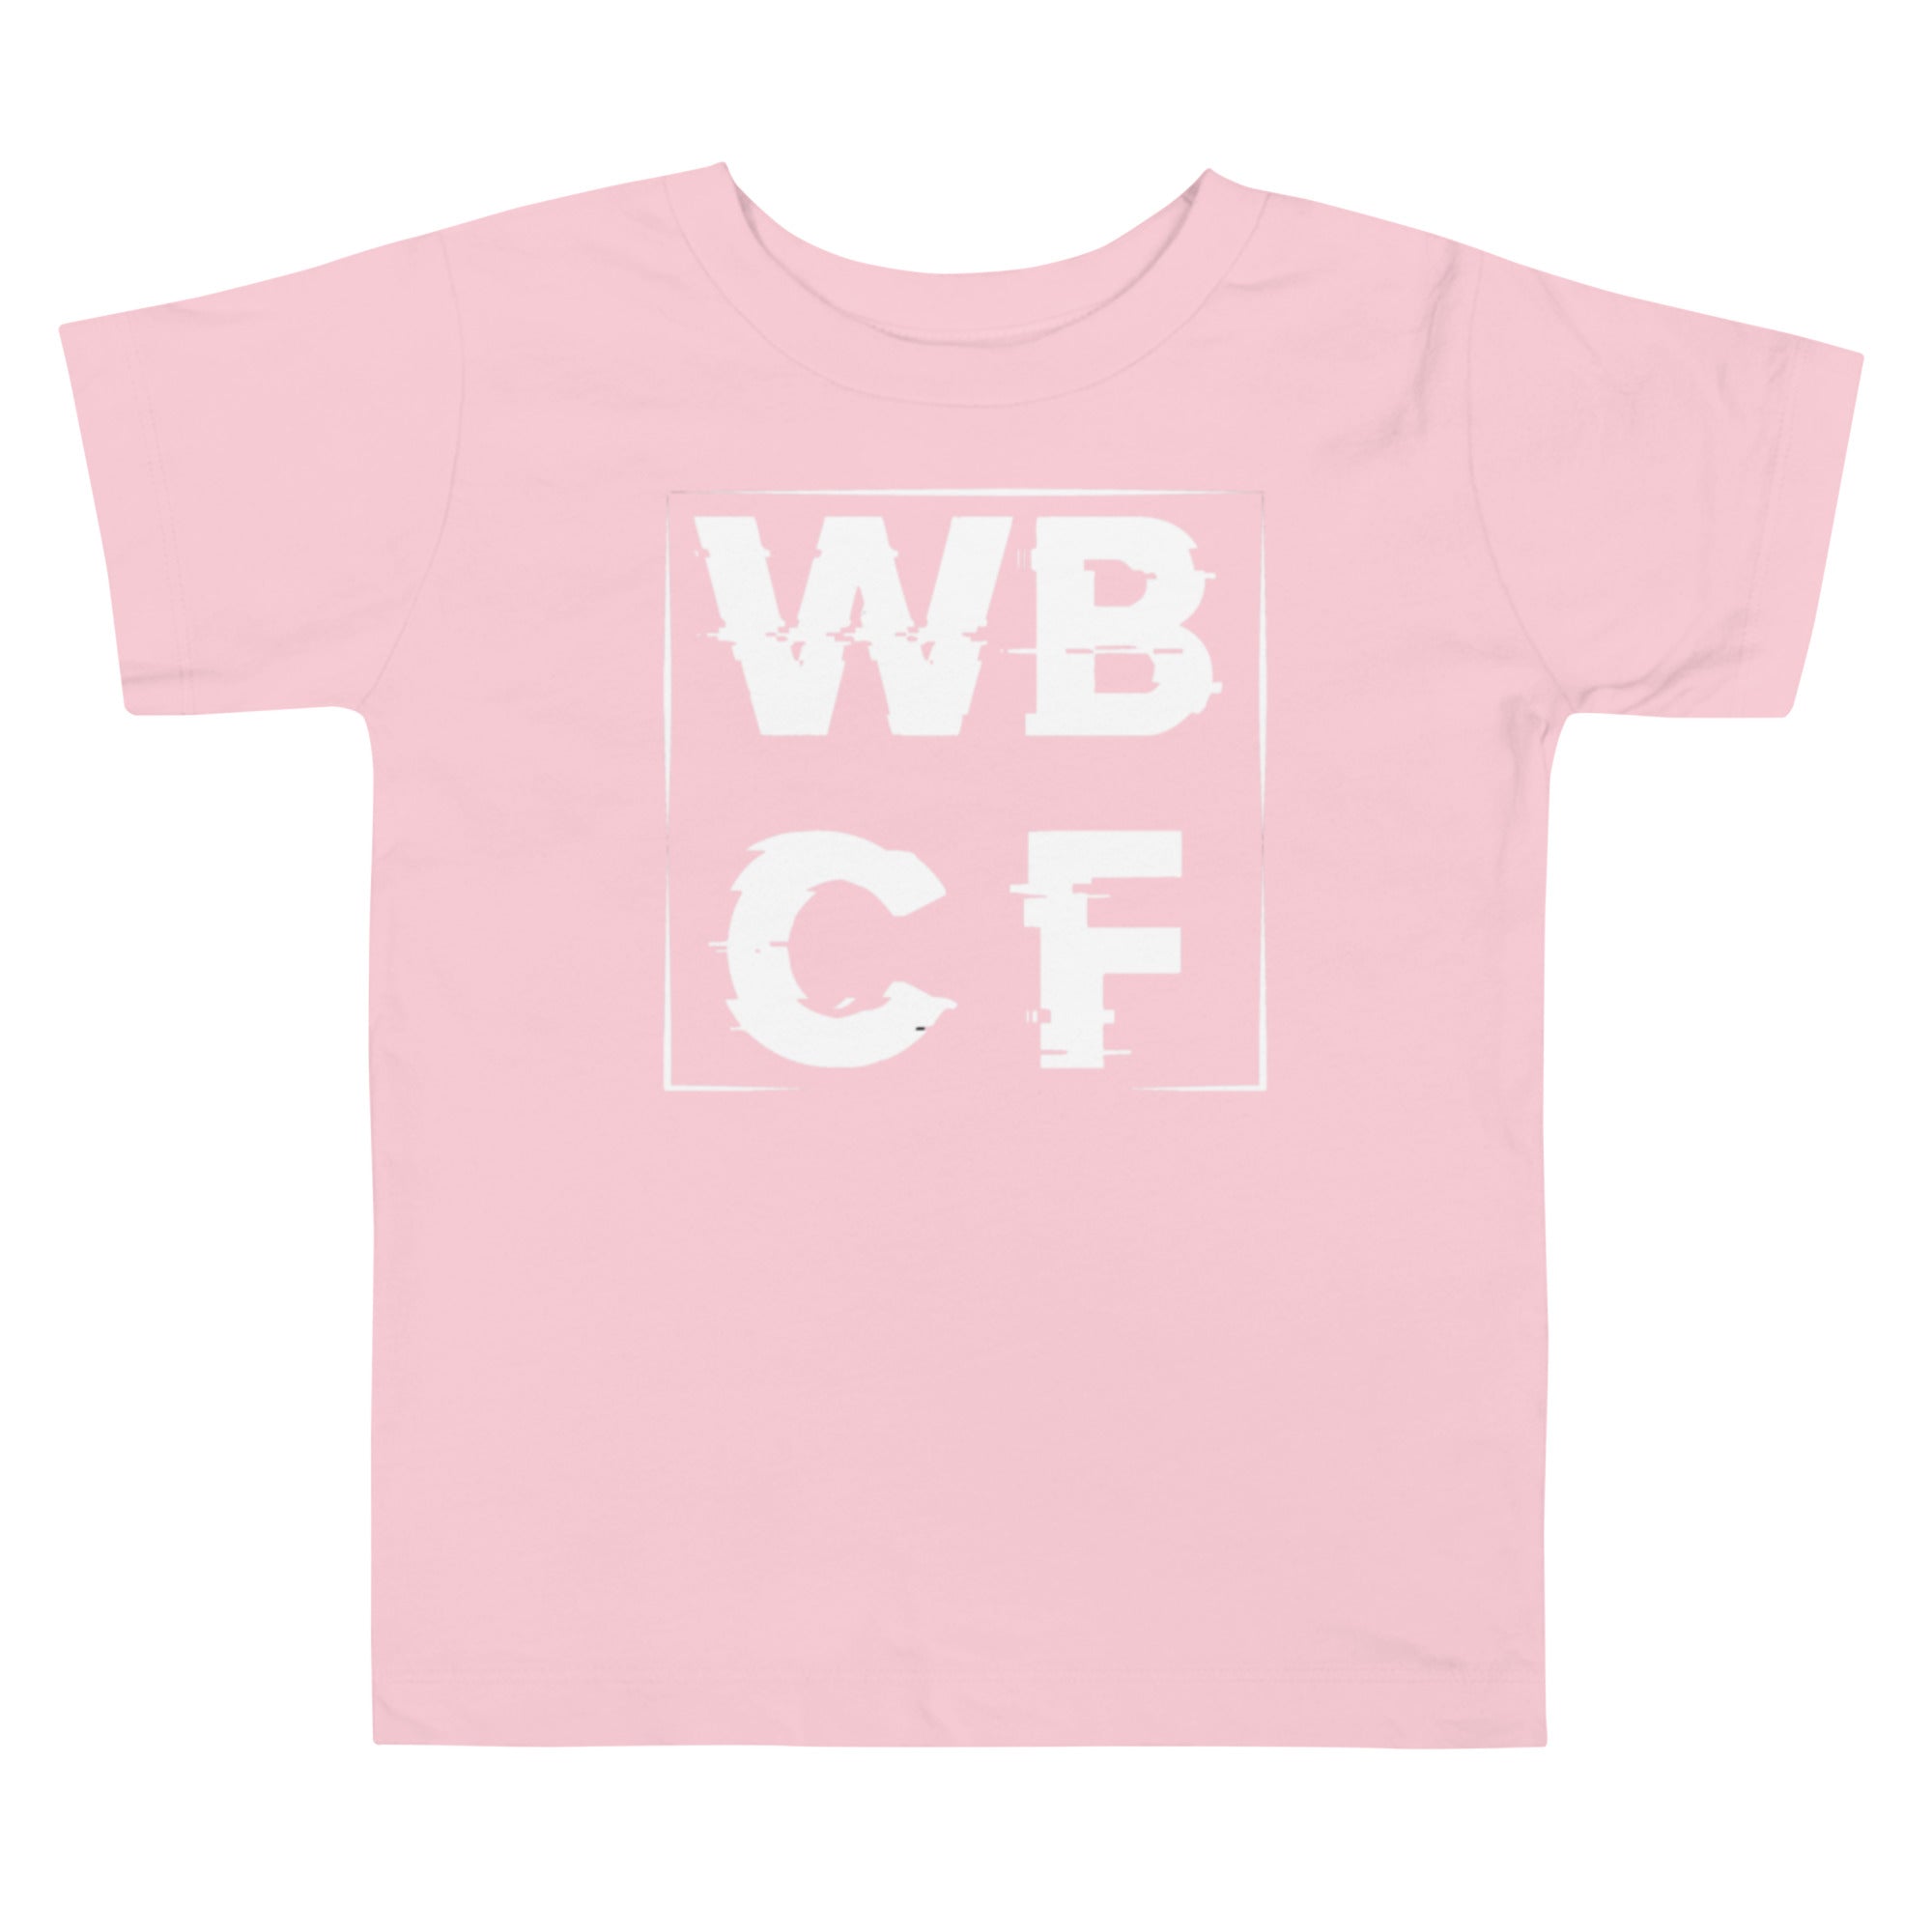 Toddler WBCF Shattered Text